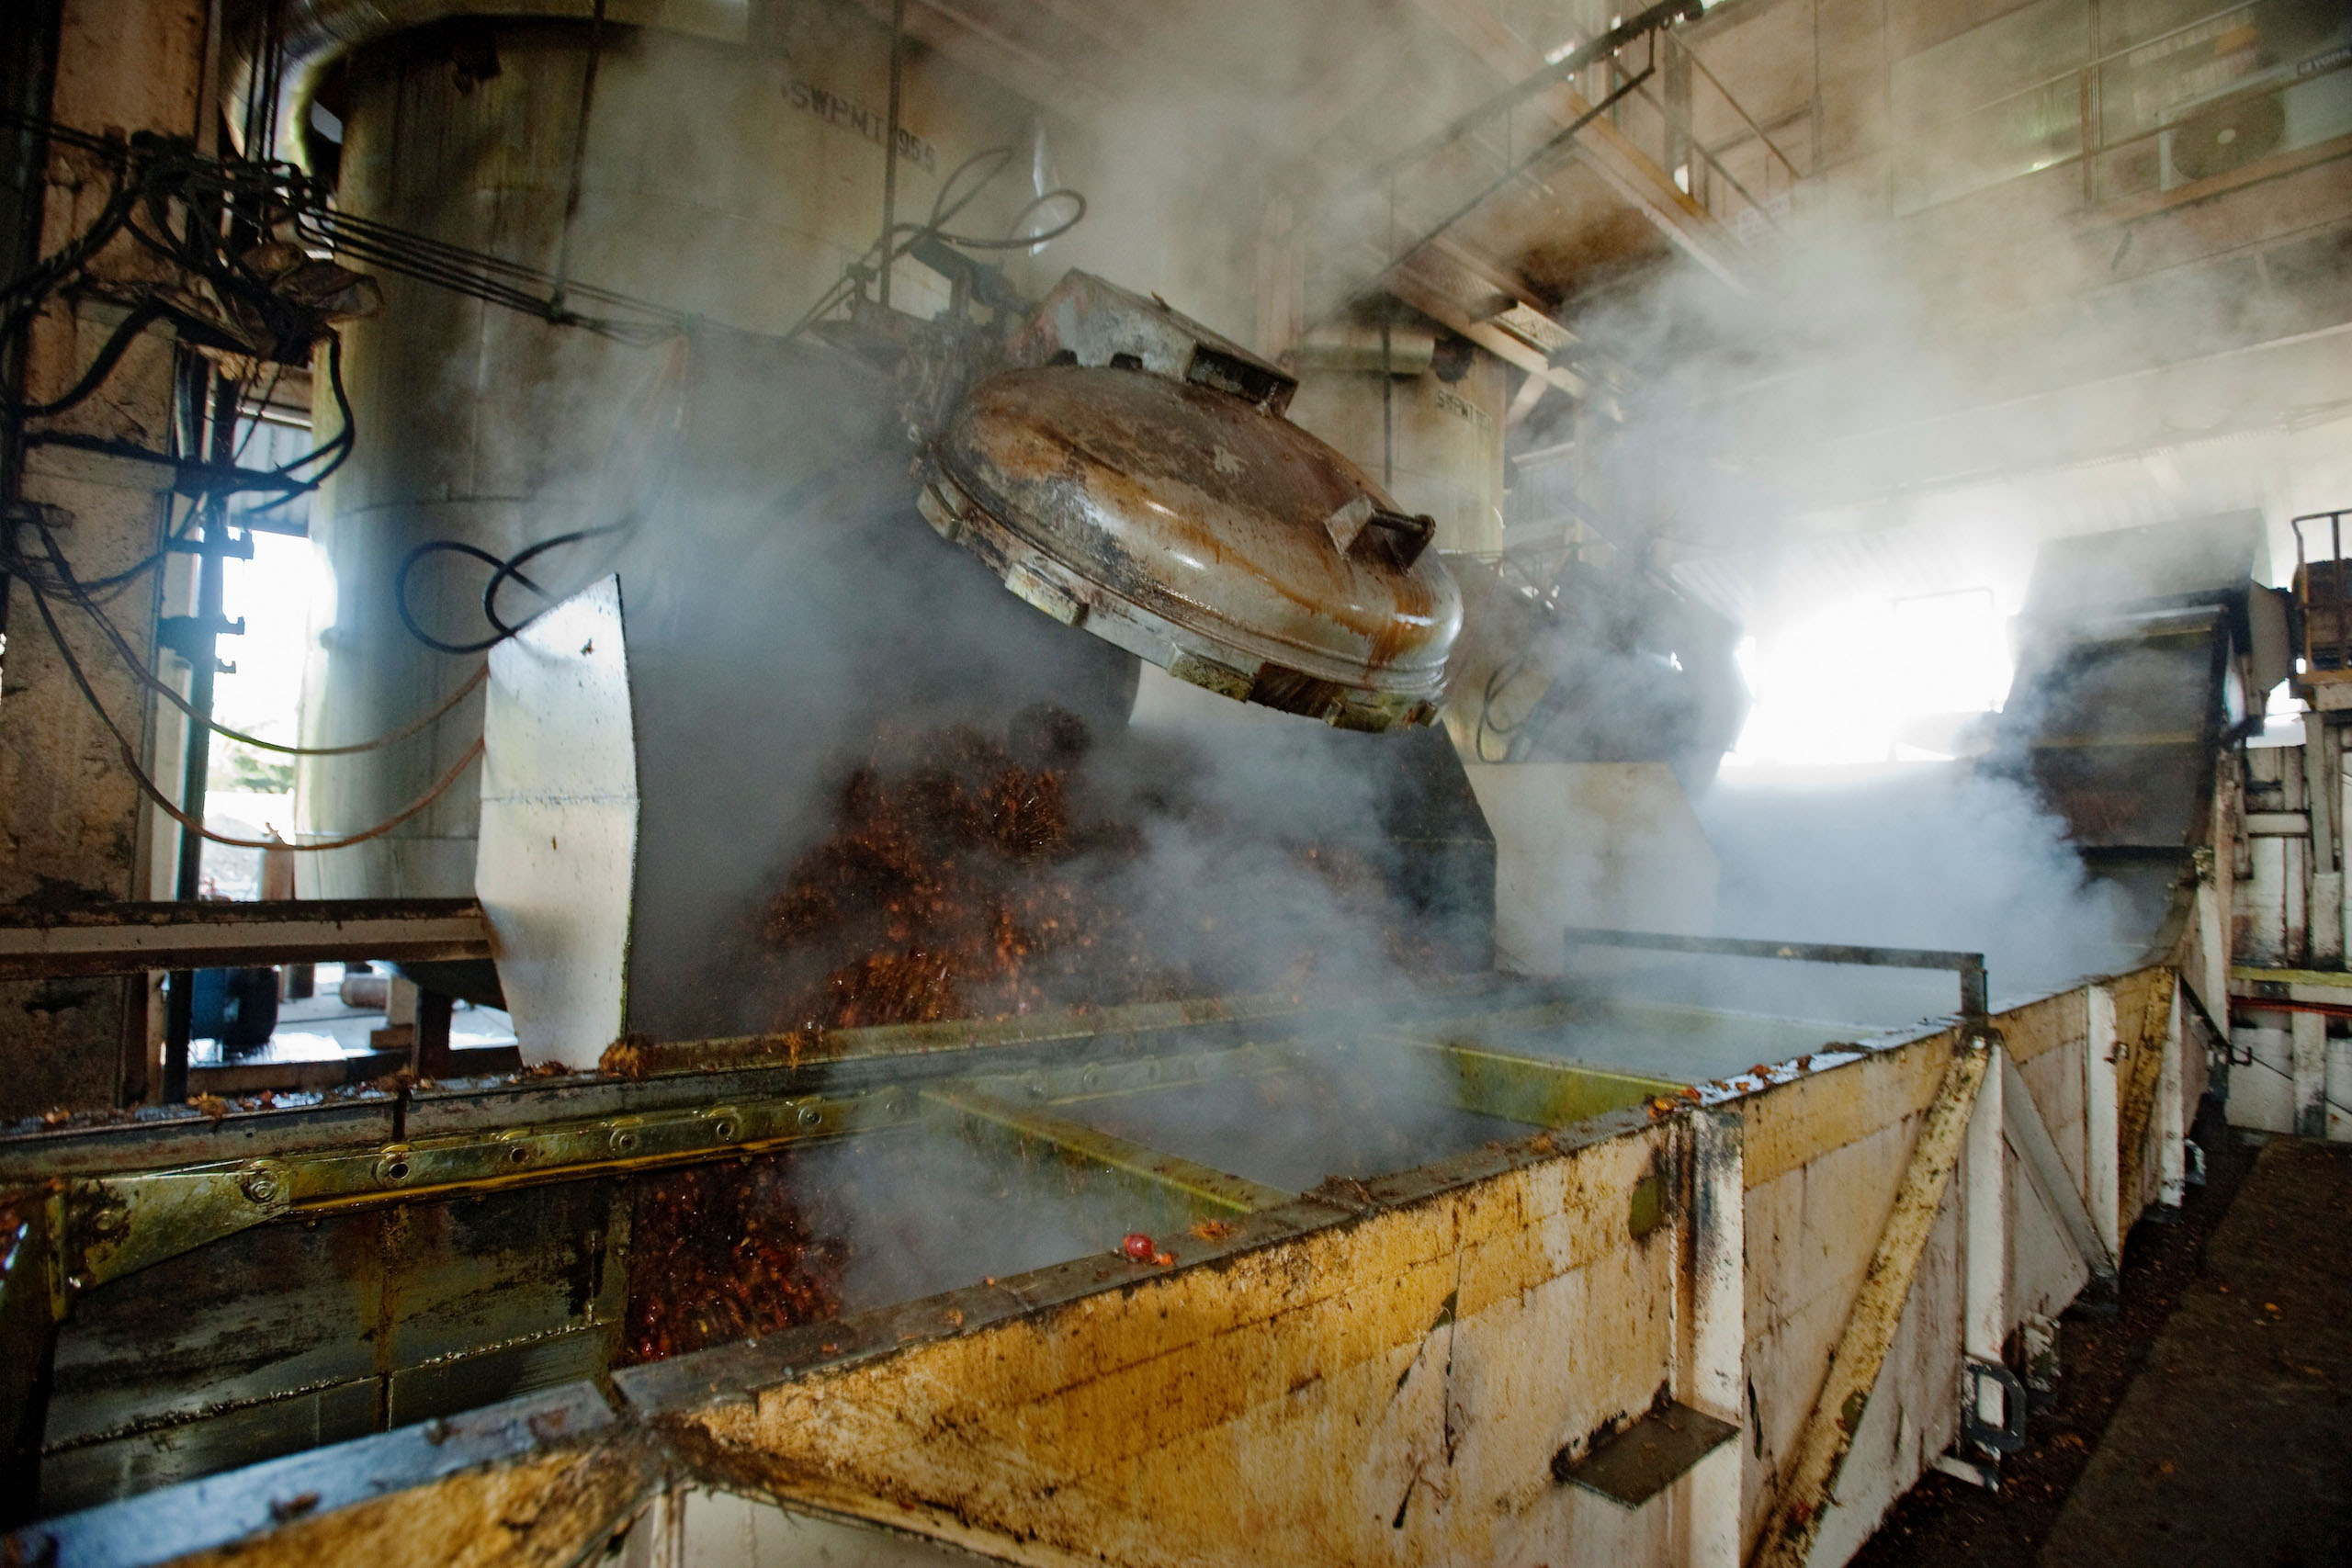 Oil palm fruit being processed. fruit is crushed extract oil which then can be used food or biodiesel.